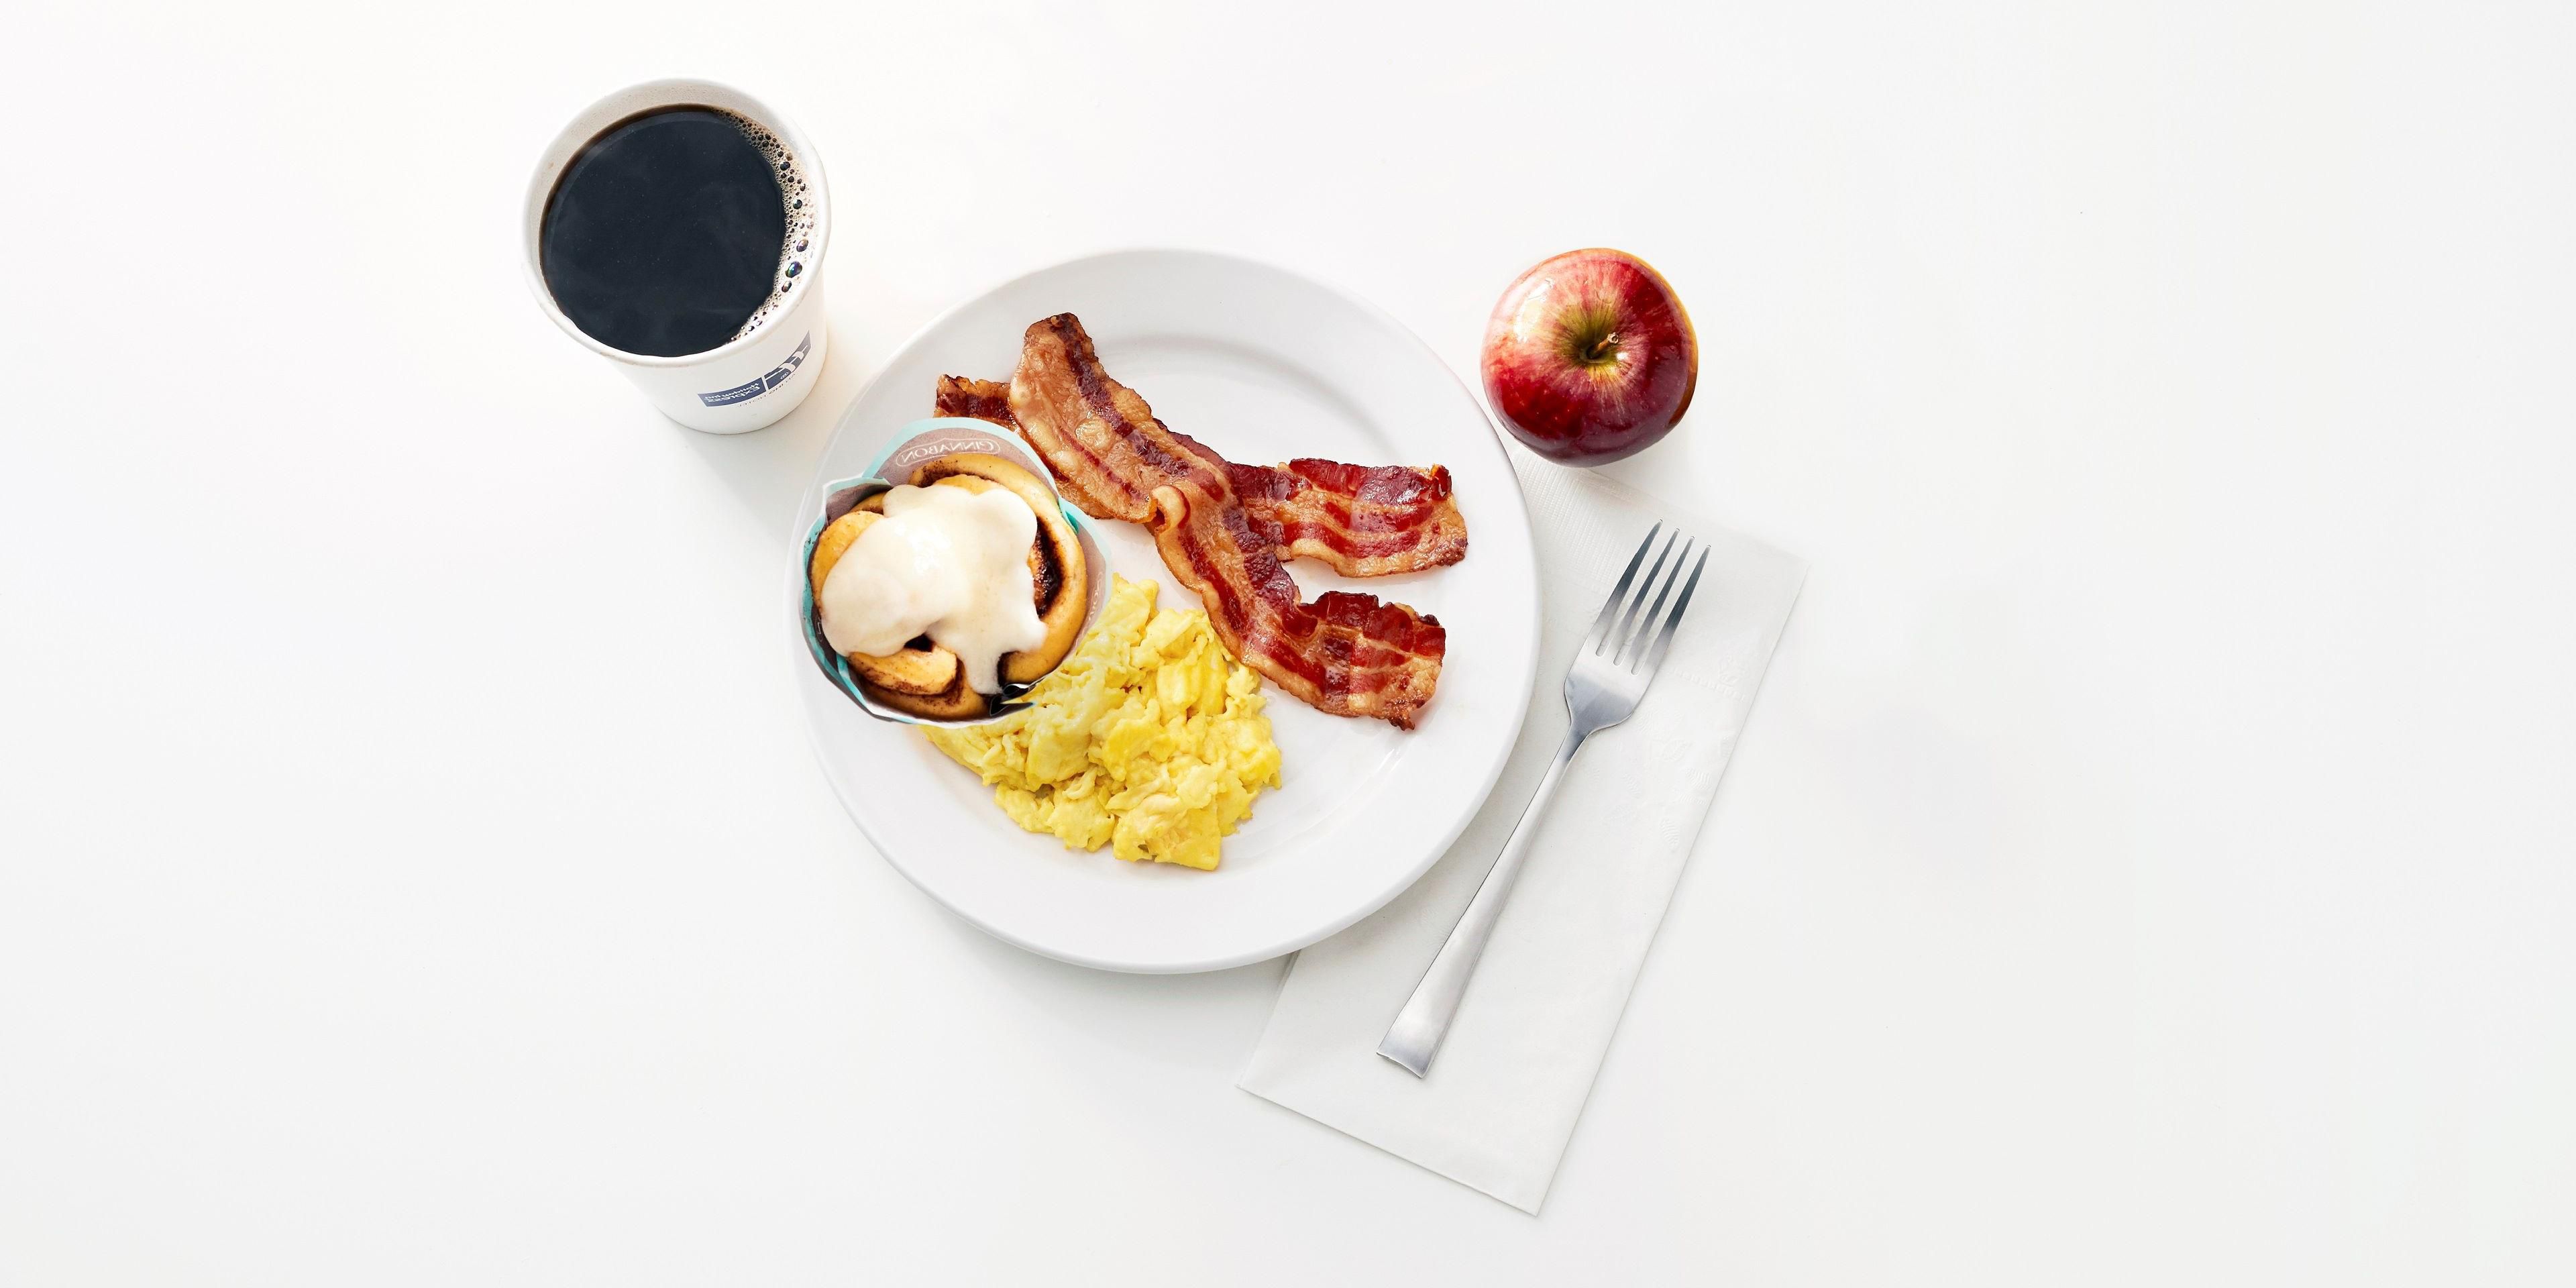 Kick start your day with our free Express Start Breakfast, with grab ‘n’ go options and favorites such as eggs and bacon, hot pancakes, our signature cinnamon rolls and fresh coffee. Offered daily from 6:00 AM to 10:00 AM. 